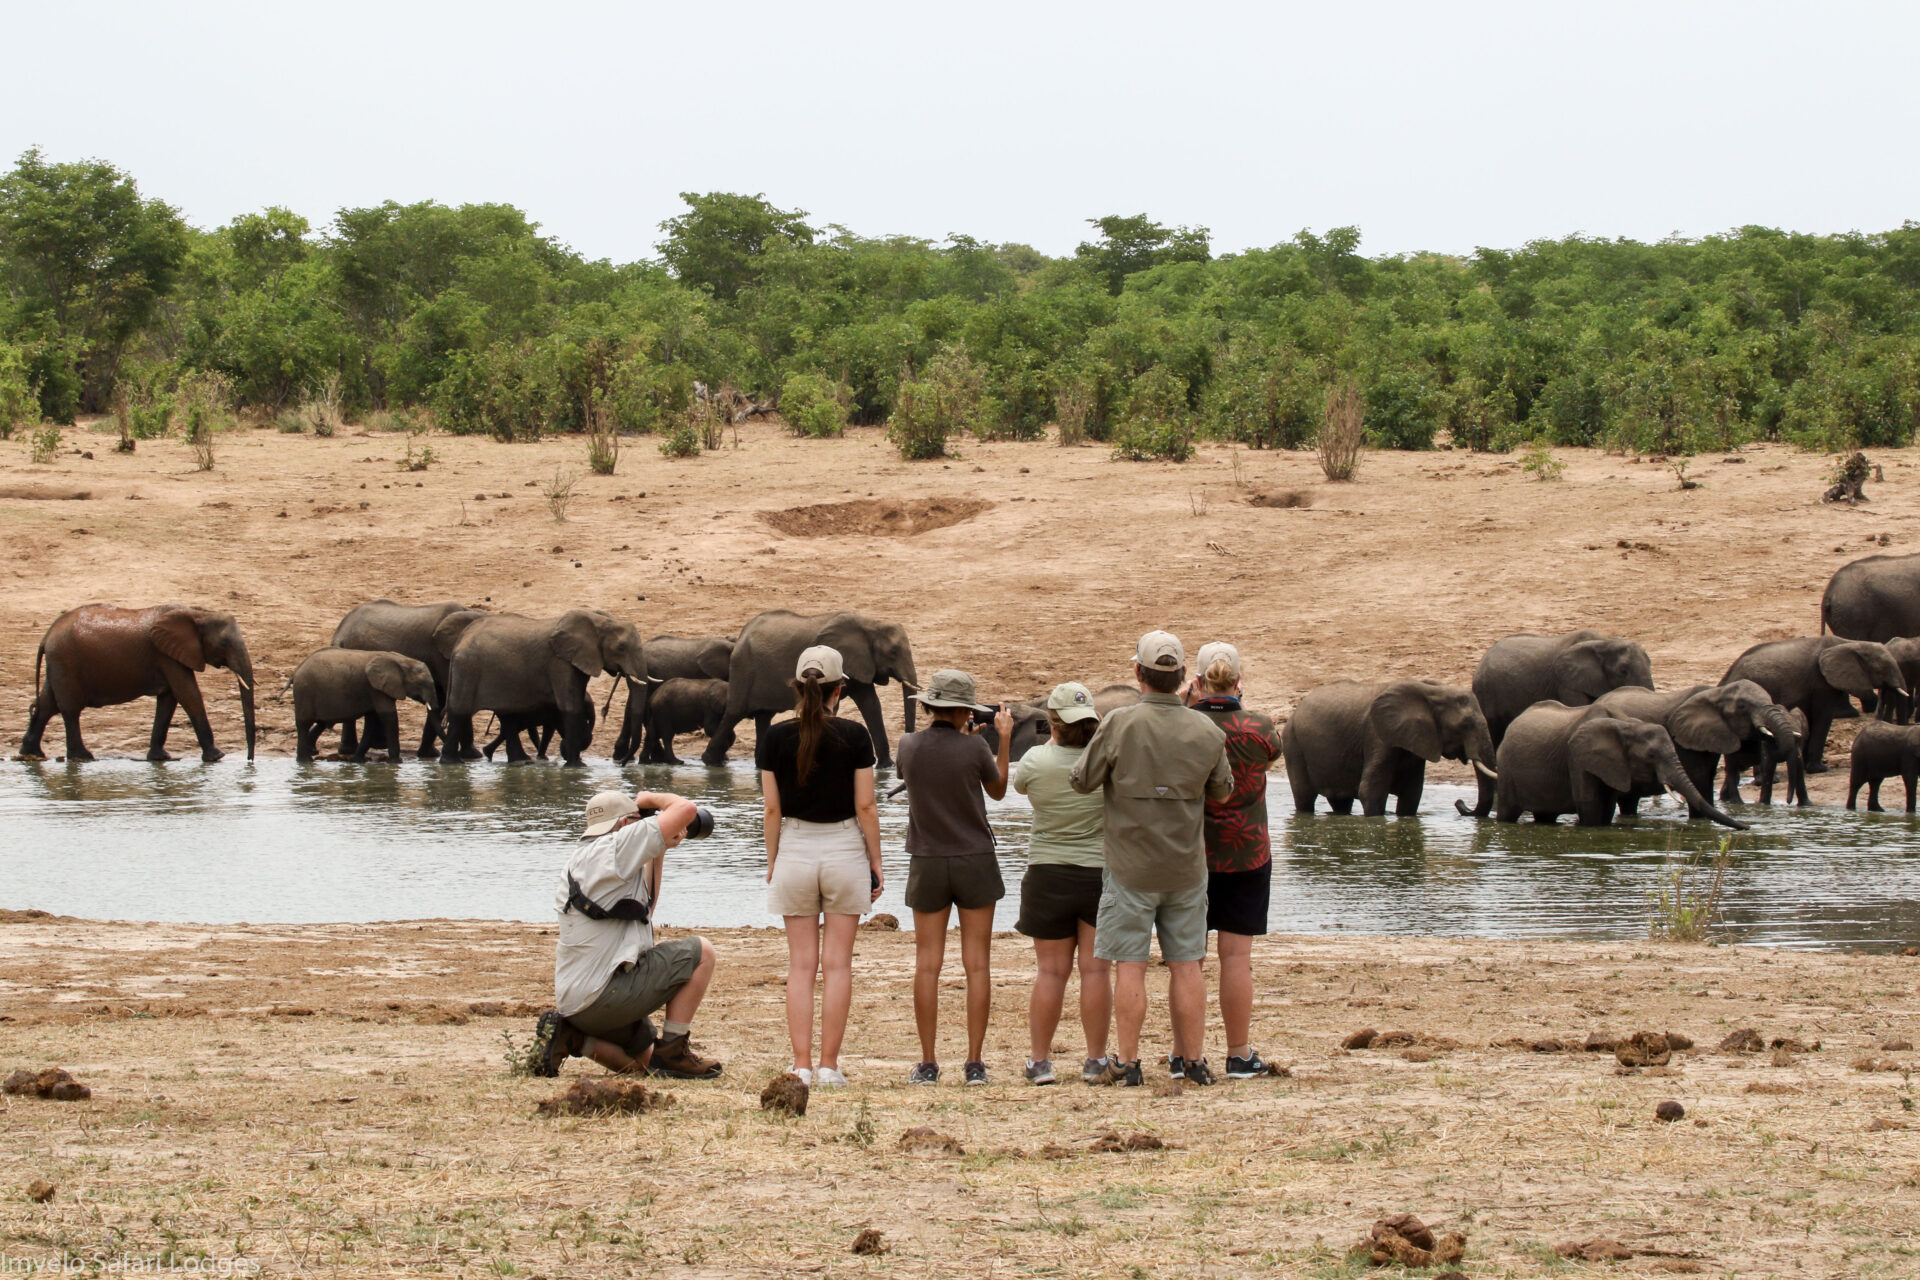 Imvelo Safari Lodges USA Fam On foot with the Elephants at Mbazu on pump run to Jozi 1 of 1 7